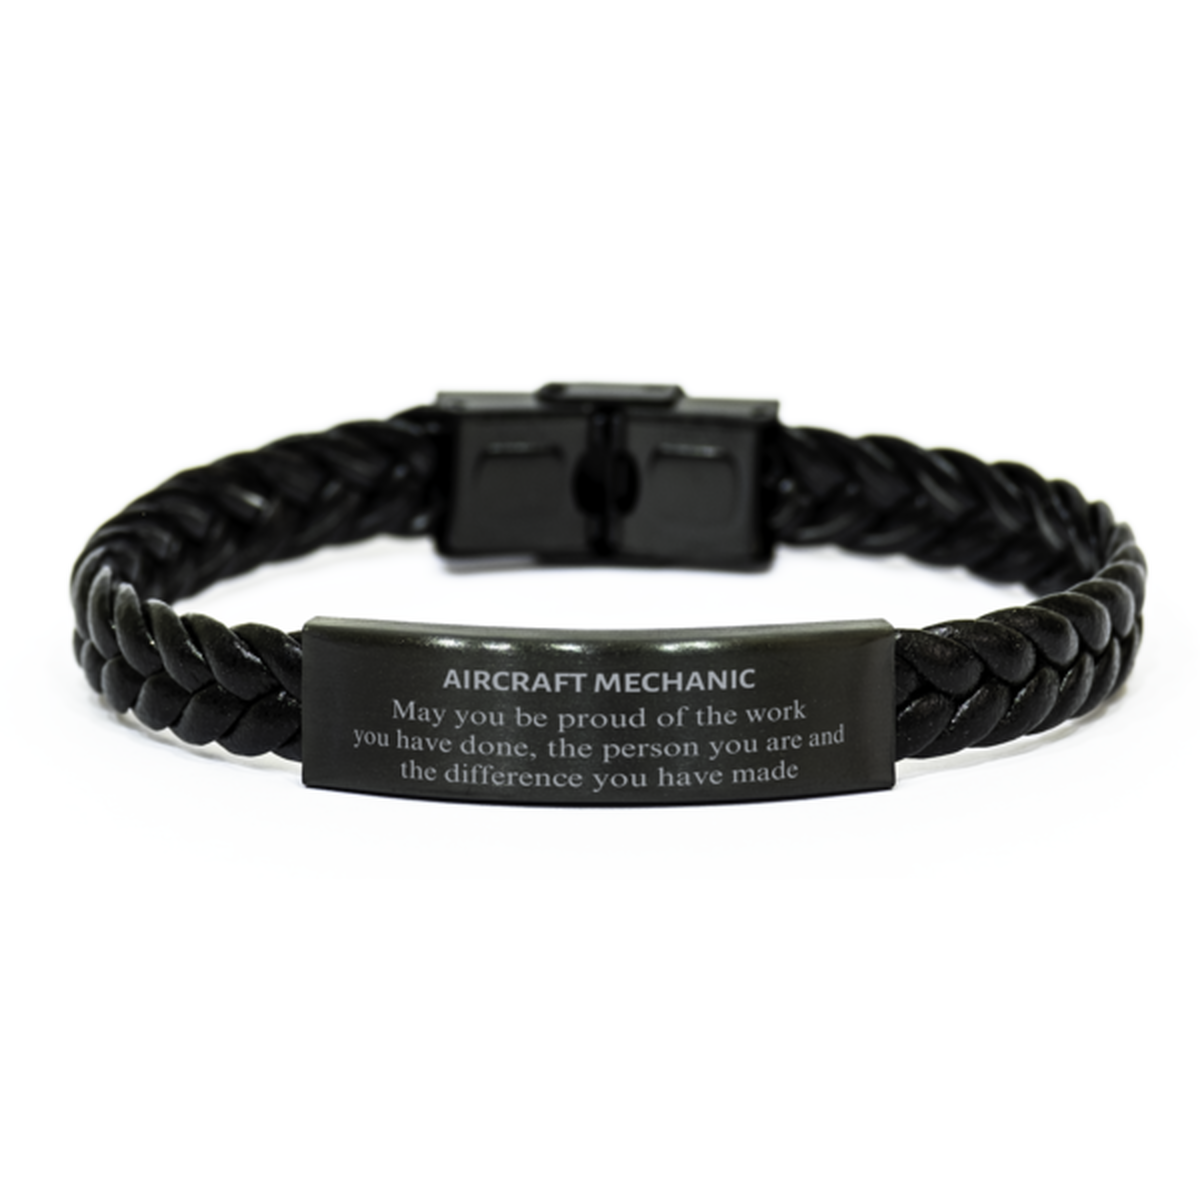 Aircraft Mechanic May you be proud of the work you have done, Retirement Aircraft Mechanic Braided Leather Bracelet for Colleague Appreciation Gifts Amazing for Aircraft Mechanic